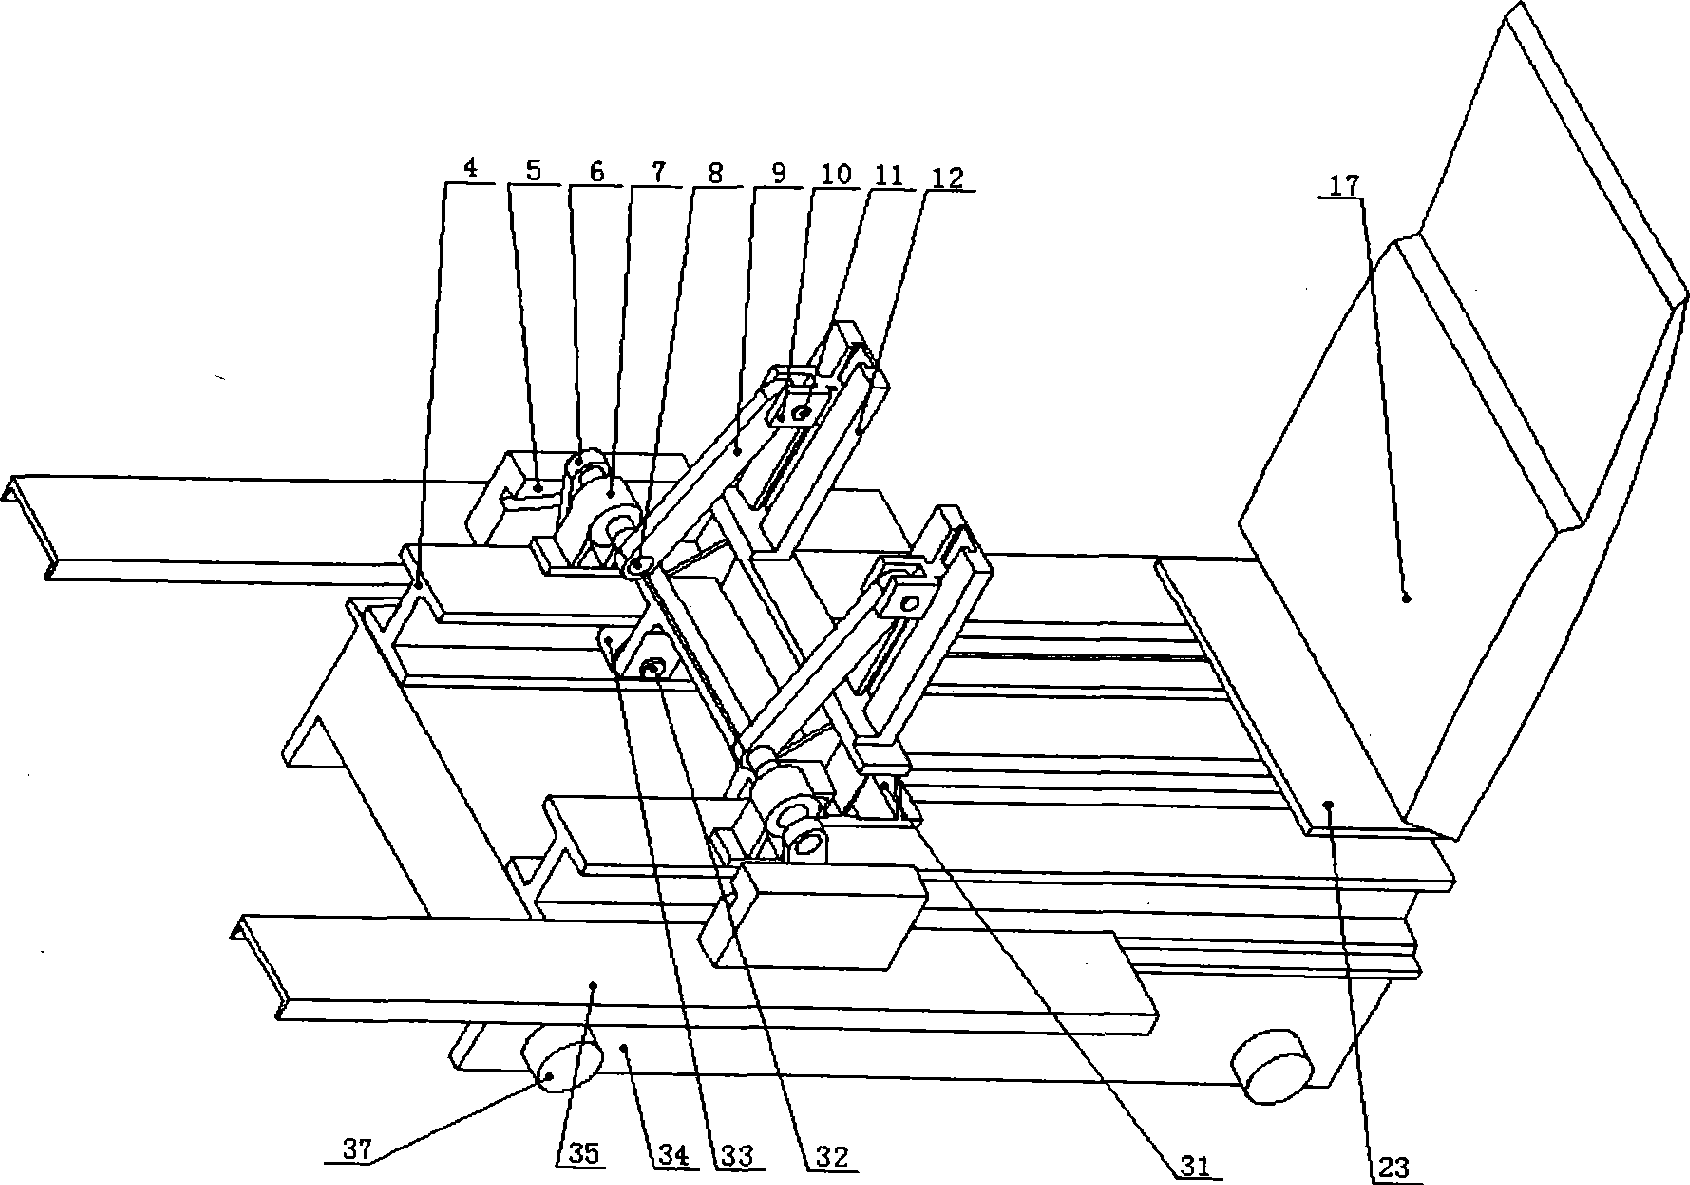 Simulation test device for automobile side collision